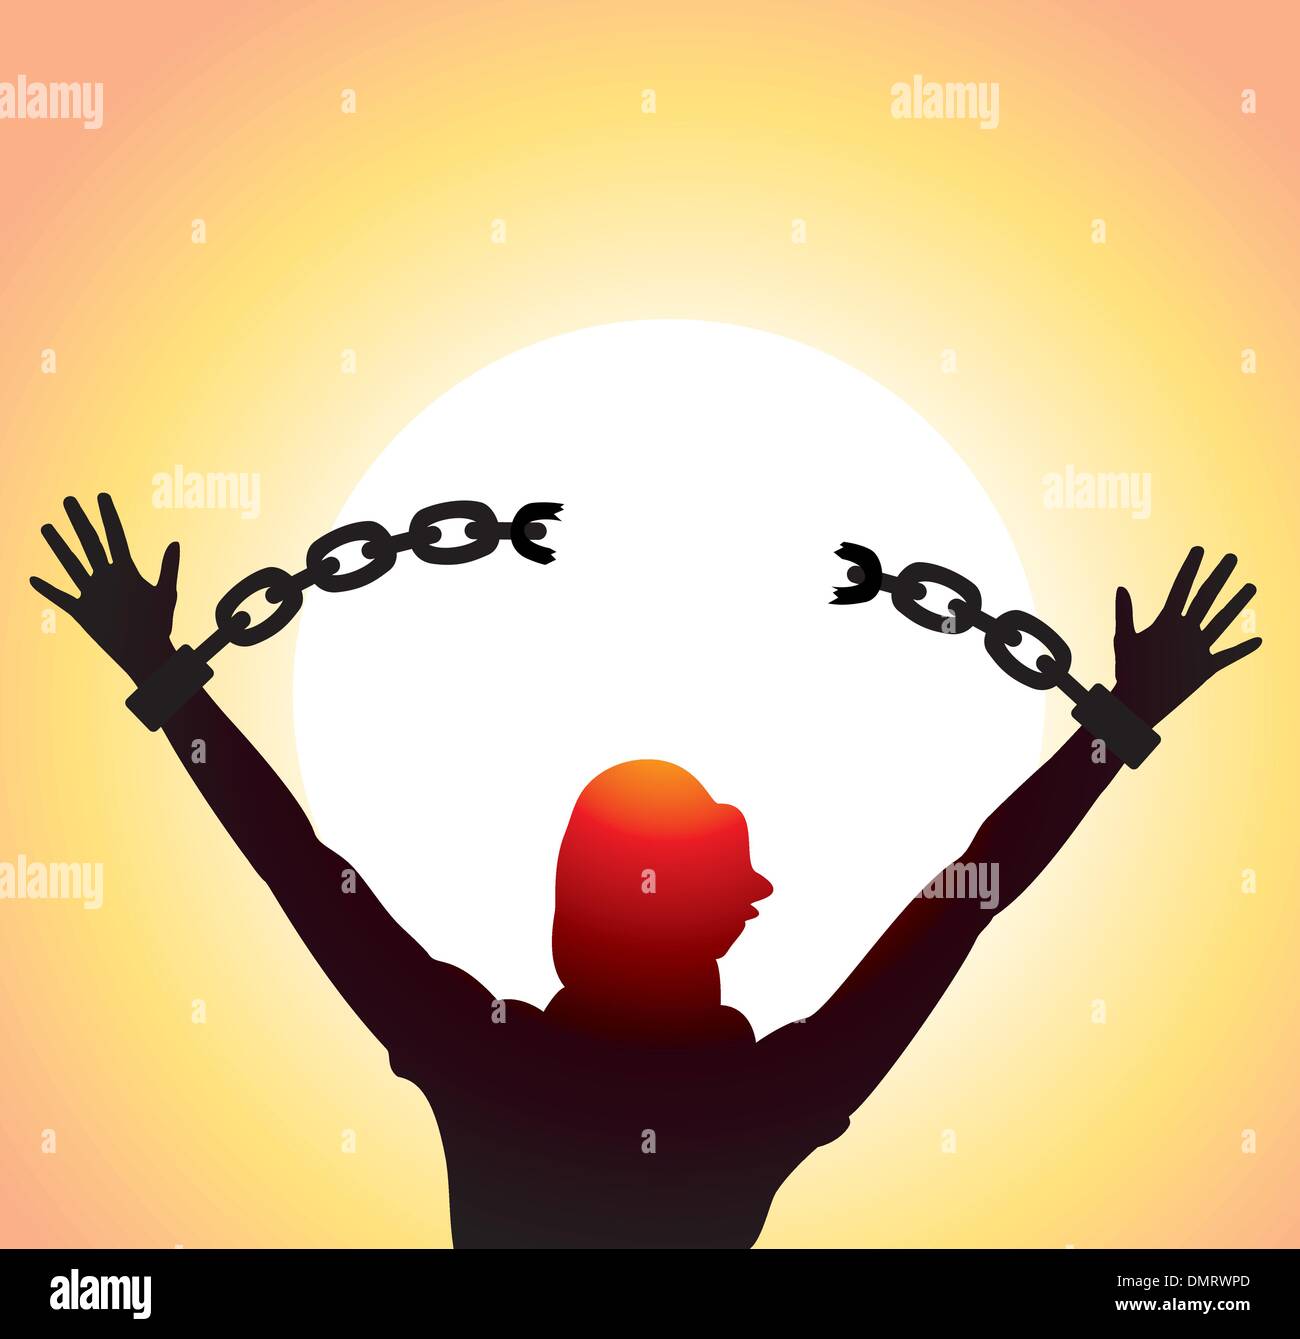 girl with raised hands and broken chains Stock Vector